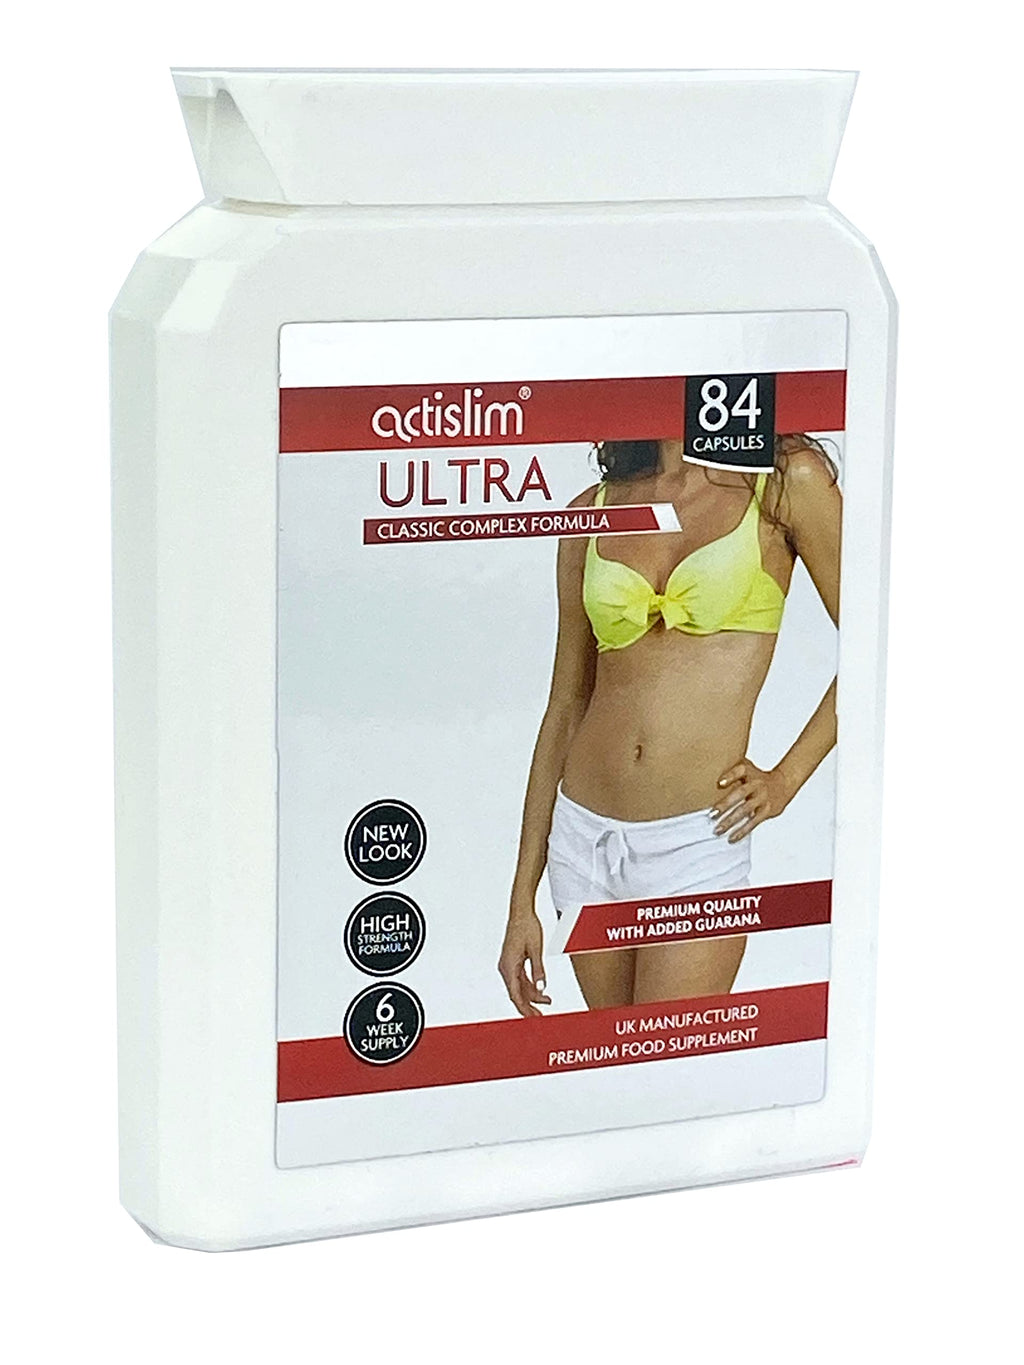 Actislim Ultra The UK's #1 Classic Weight Loss Slimming Pill, Contains Ginkgo Leaf, Guarana, Ginger and Caffeine for a Subtle “Powerful” Weight Loss 6 Week Course of a Diet Pill which Really Works - BeesActive Australia